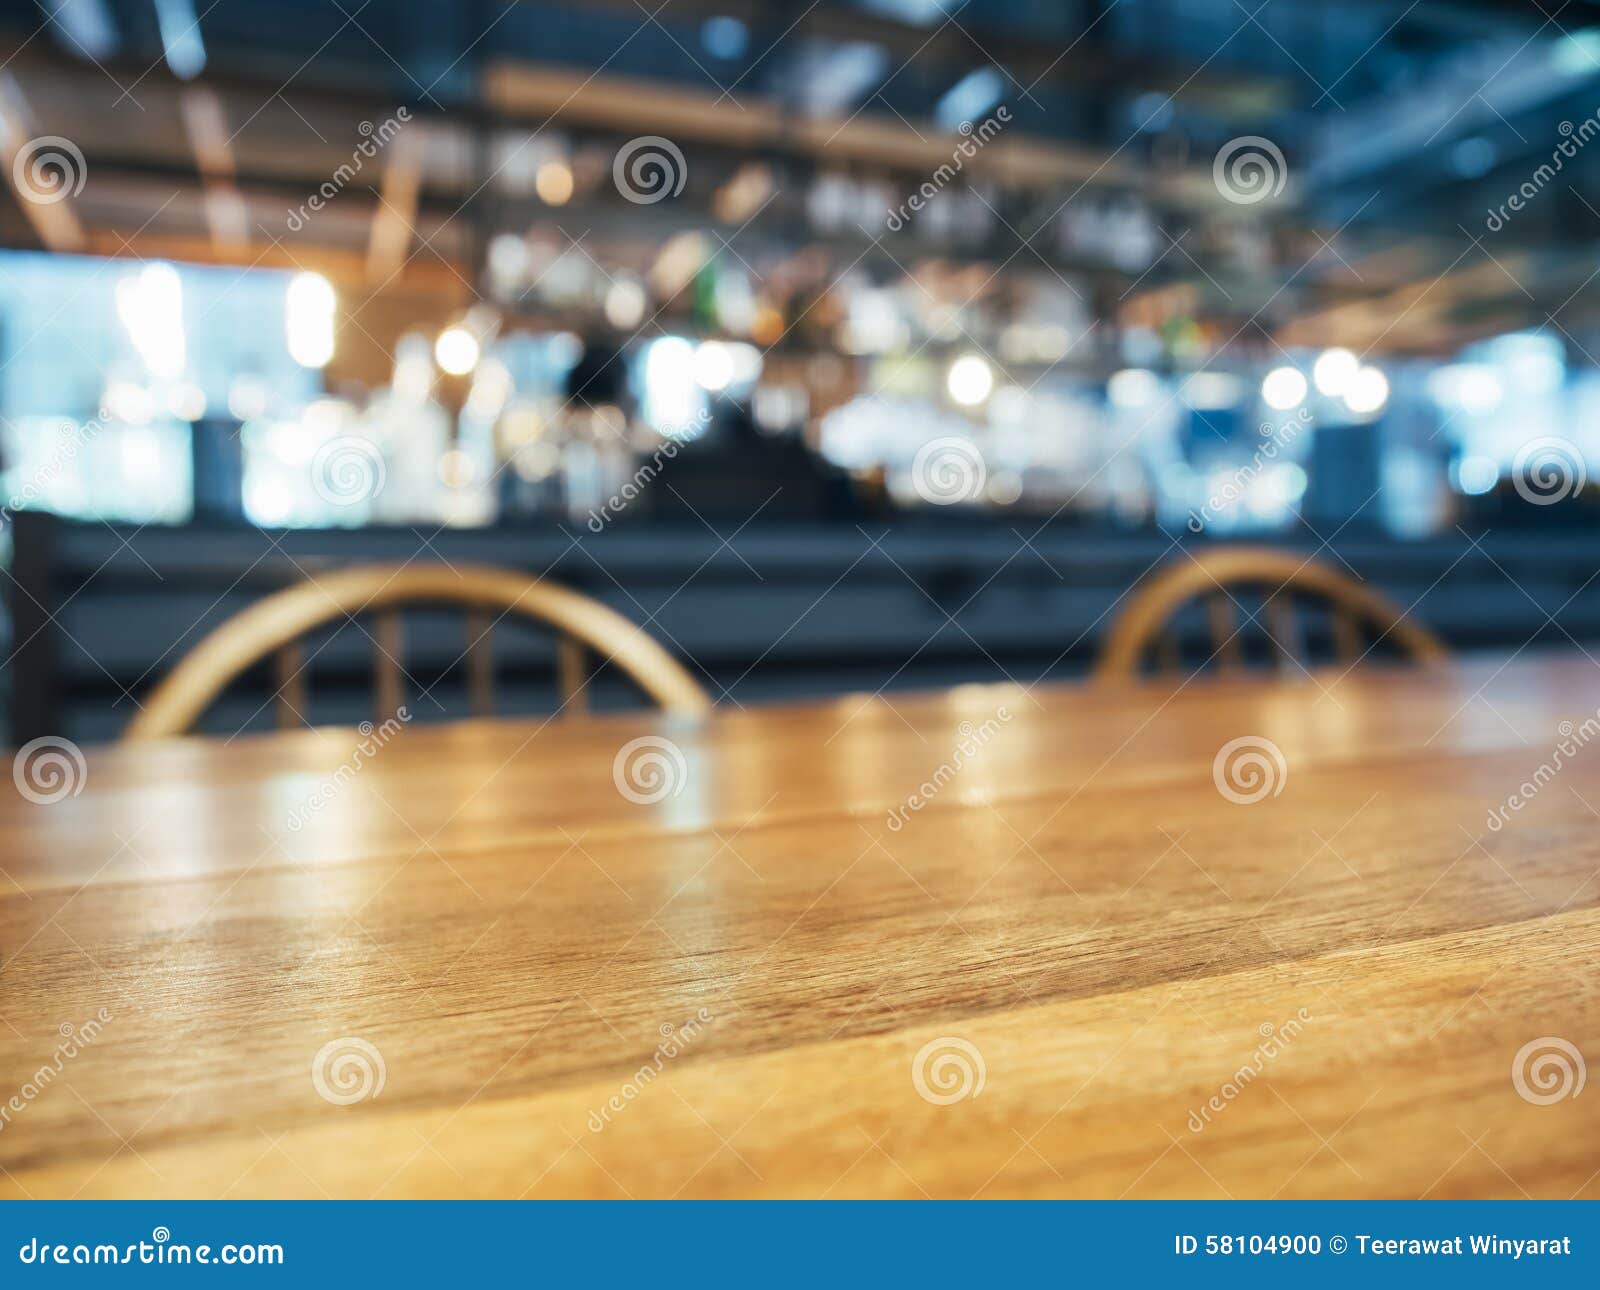 Table Top Counter And Seats With Blurred Bar Restaurant Background Stock  Photo 58104900 - Megapixl